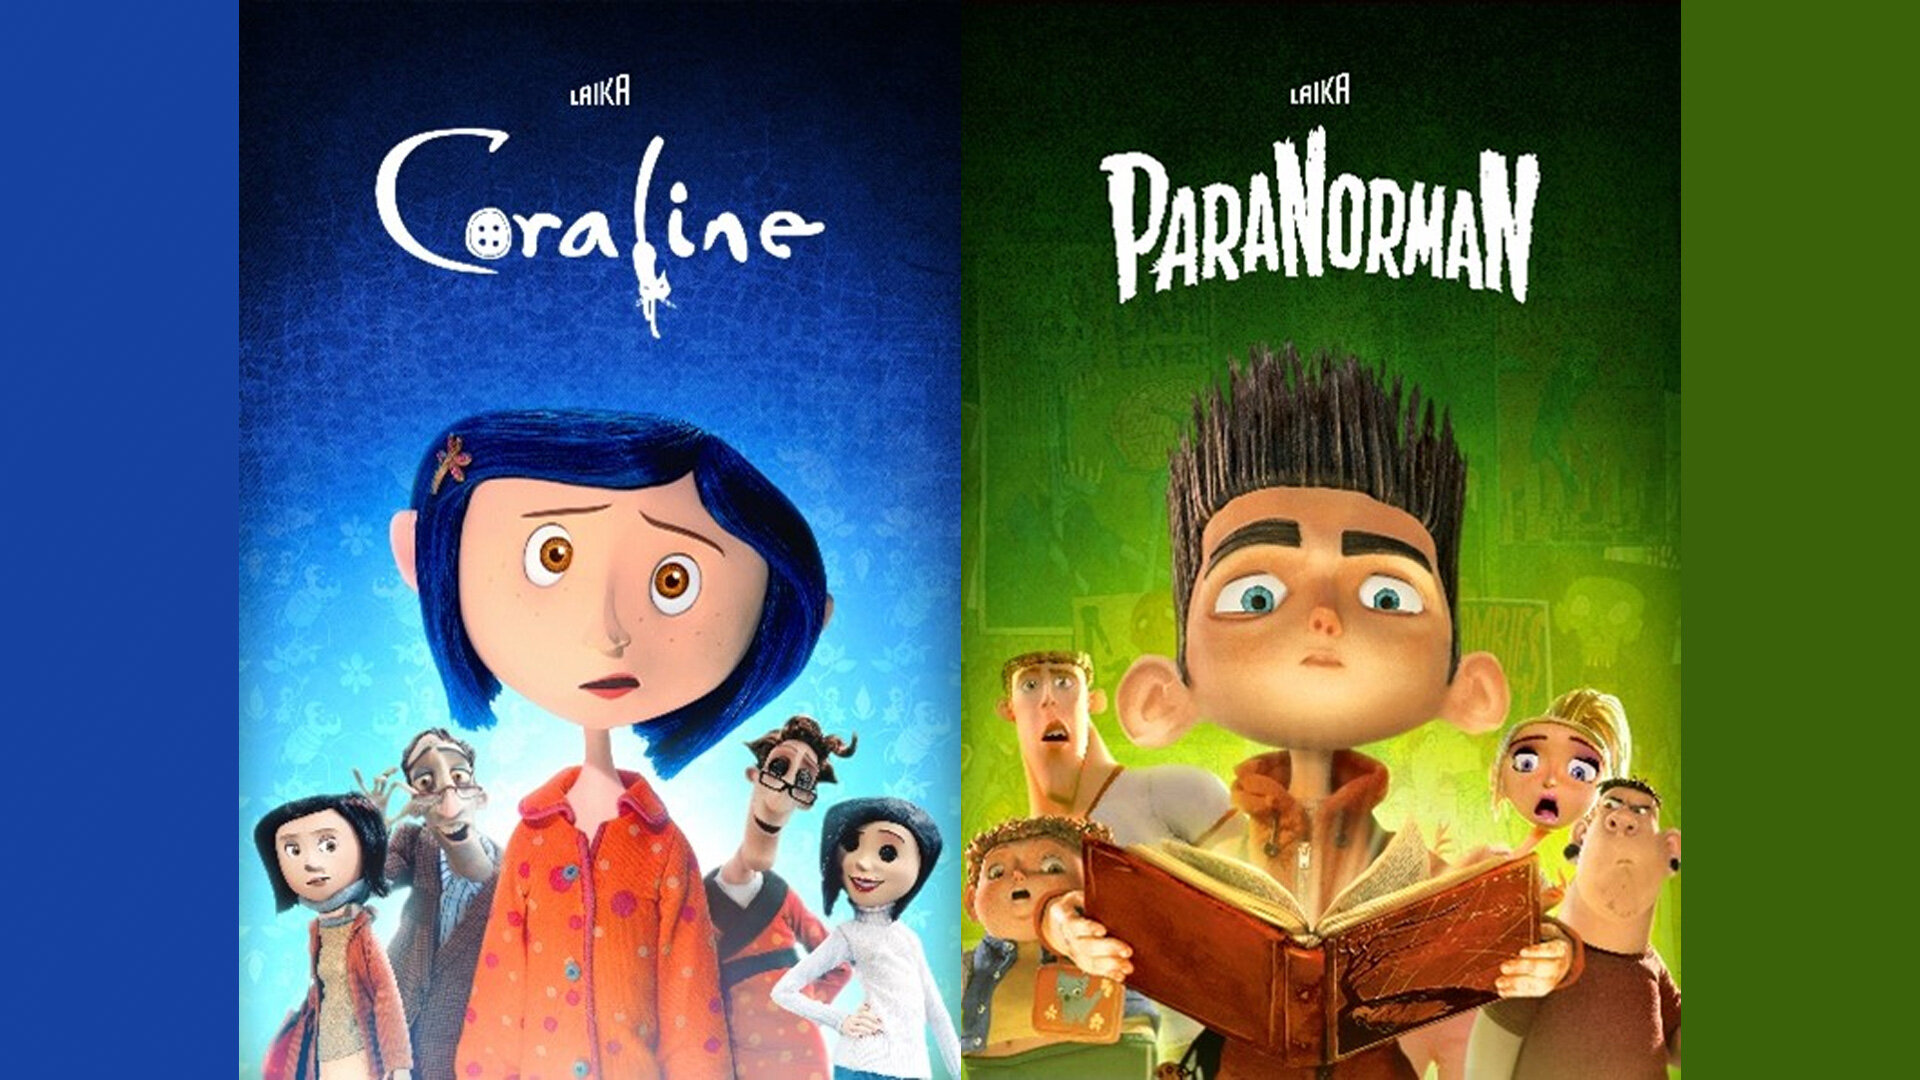 CORALINE and PARANORMAN Are Returning to Theaters for LAIKA's 15th